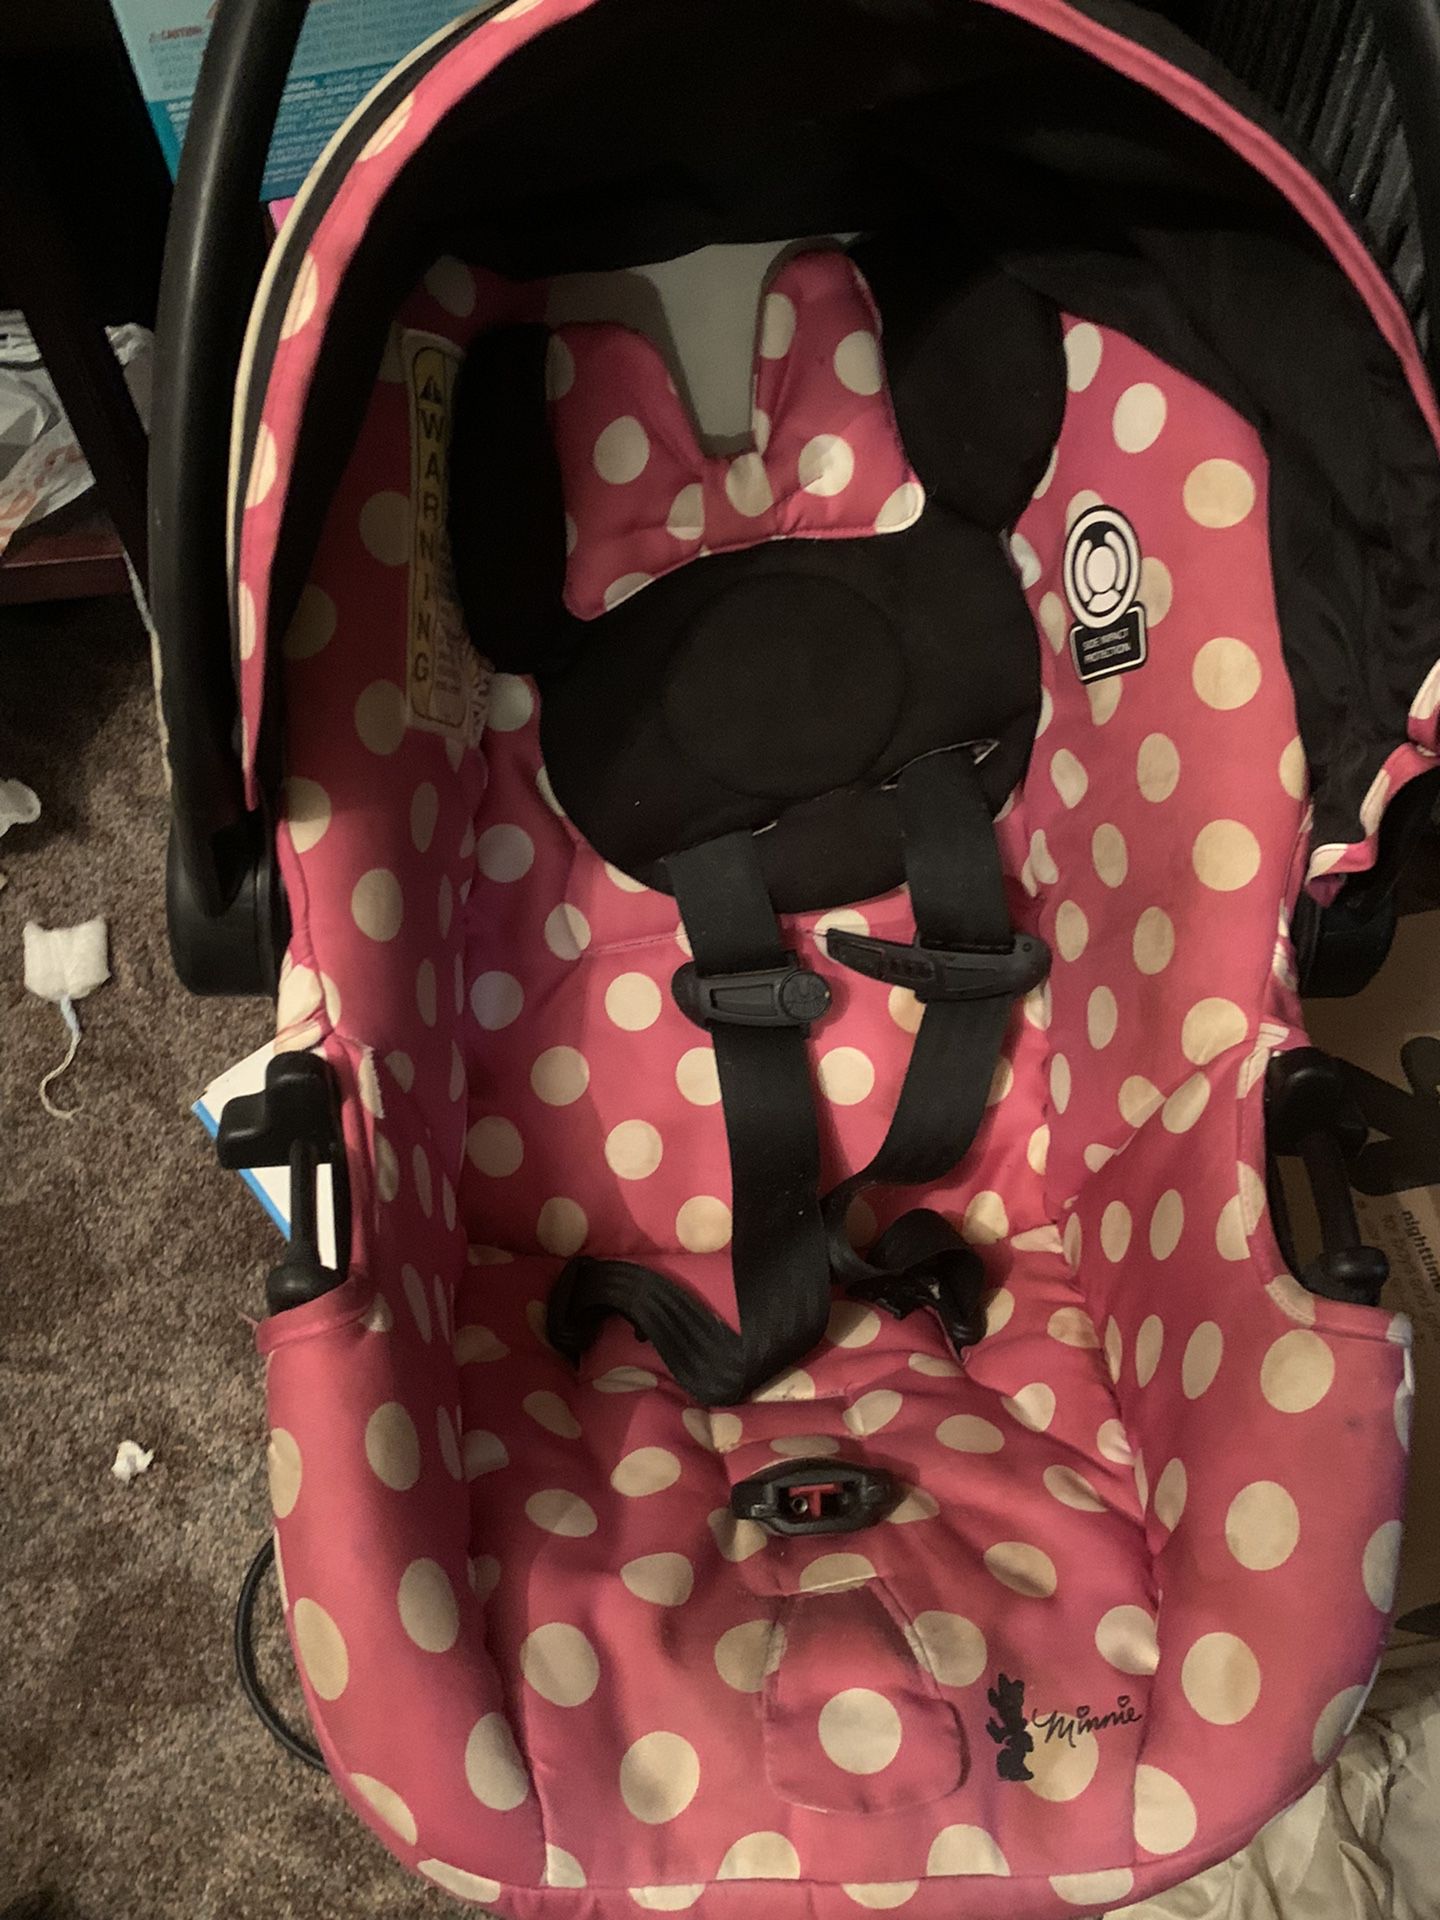 Minnie Mouse Car seat 